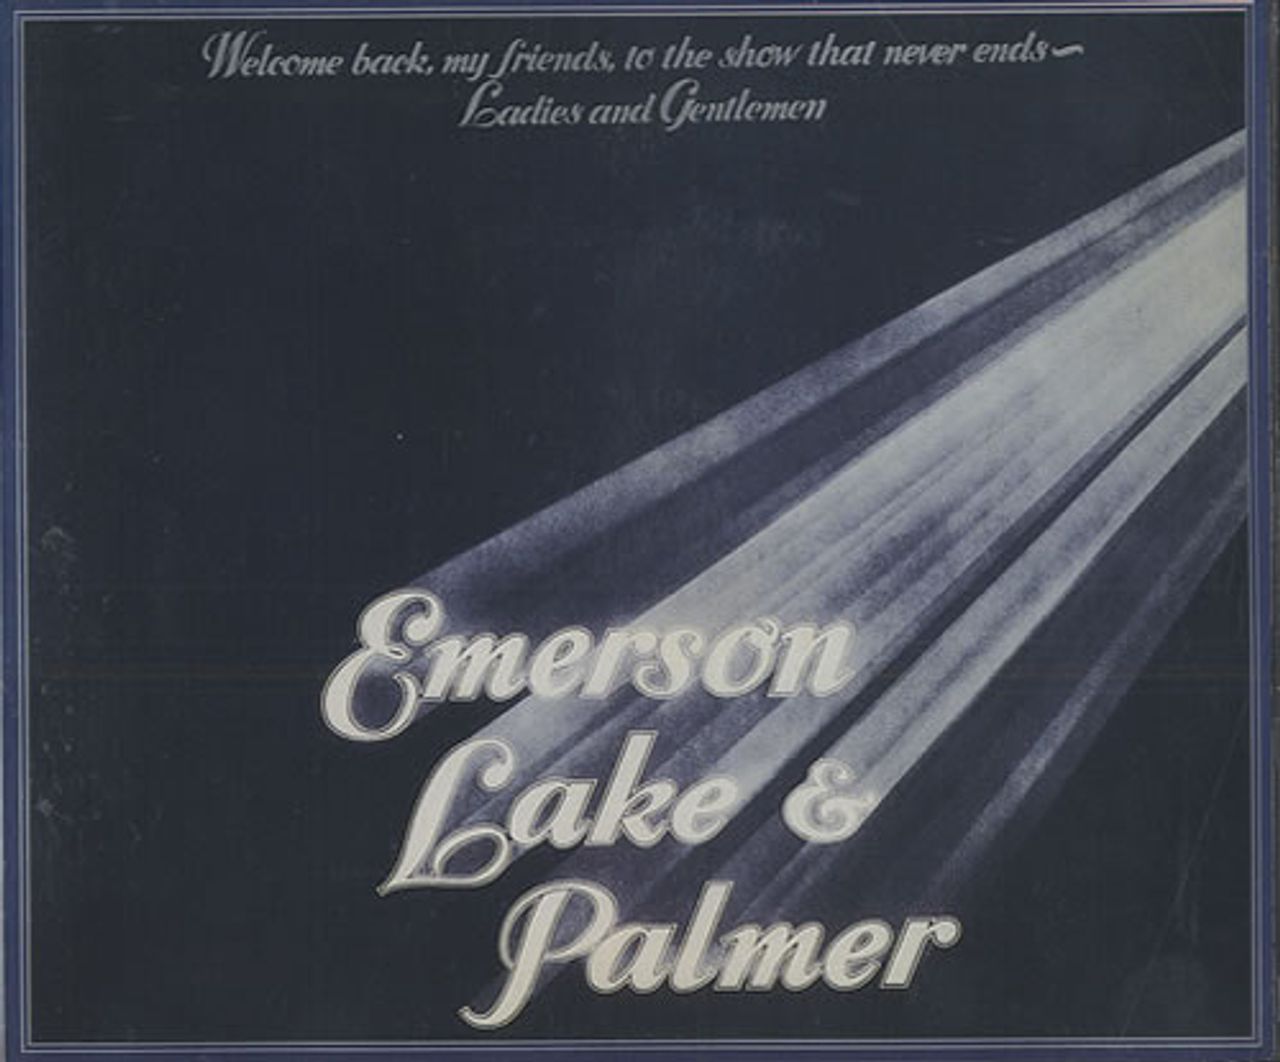 Emerson Lake & Palmer Welcome Back My Friends To The Show That Never Ends Japanese 2 CD album set (Double CD) AMCY-215~6